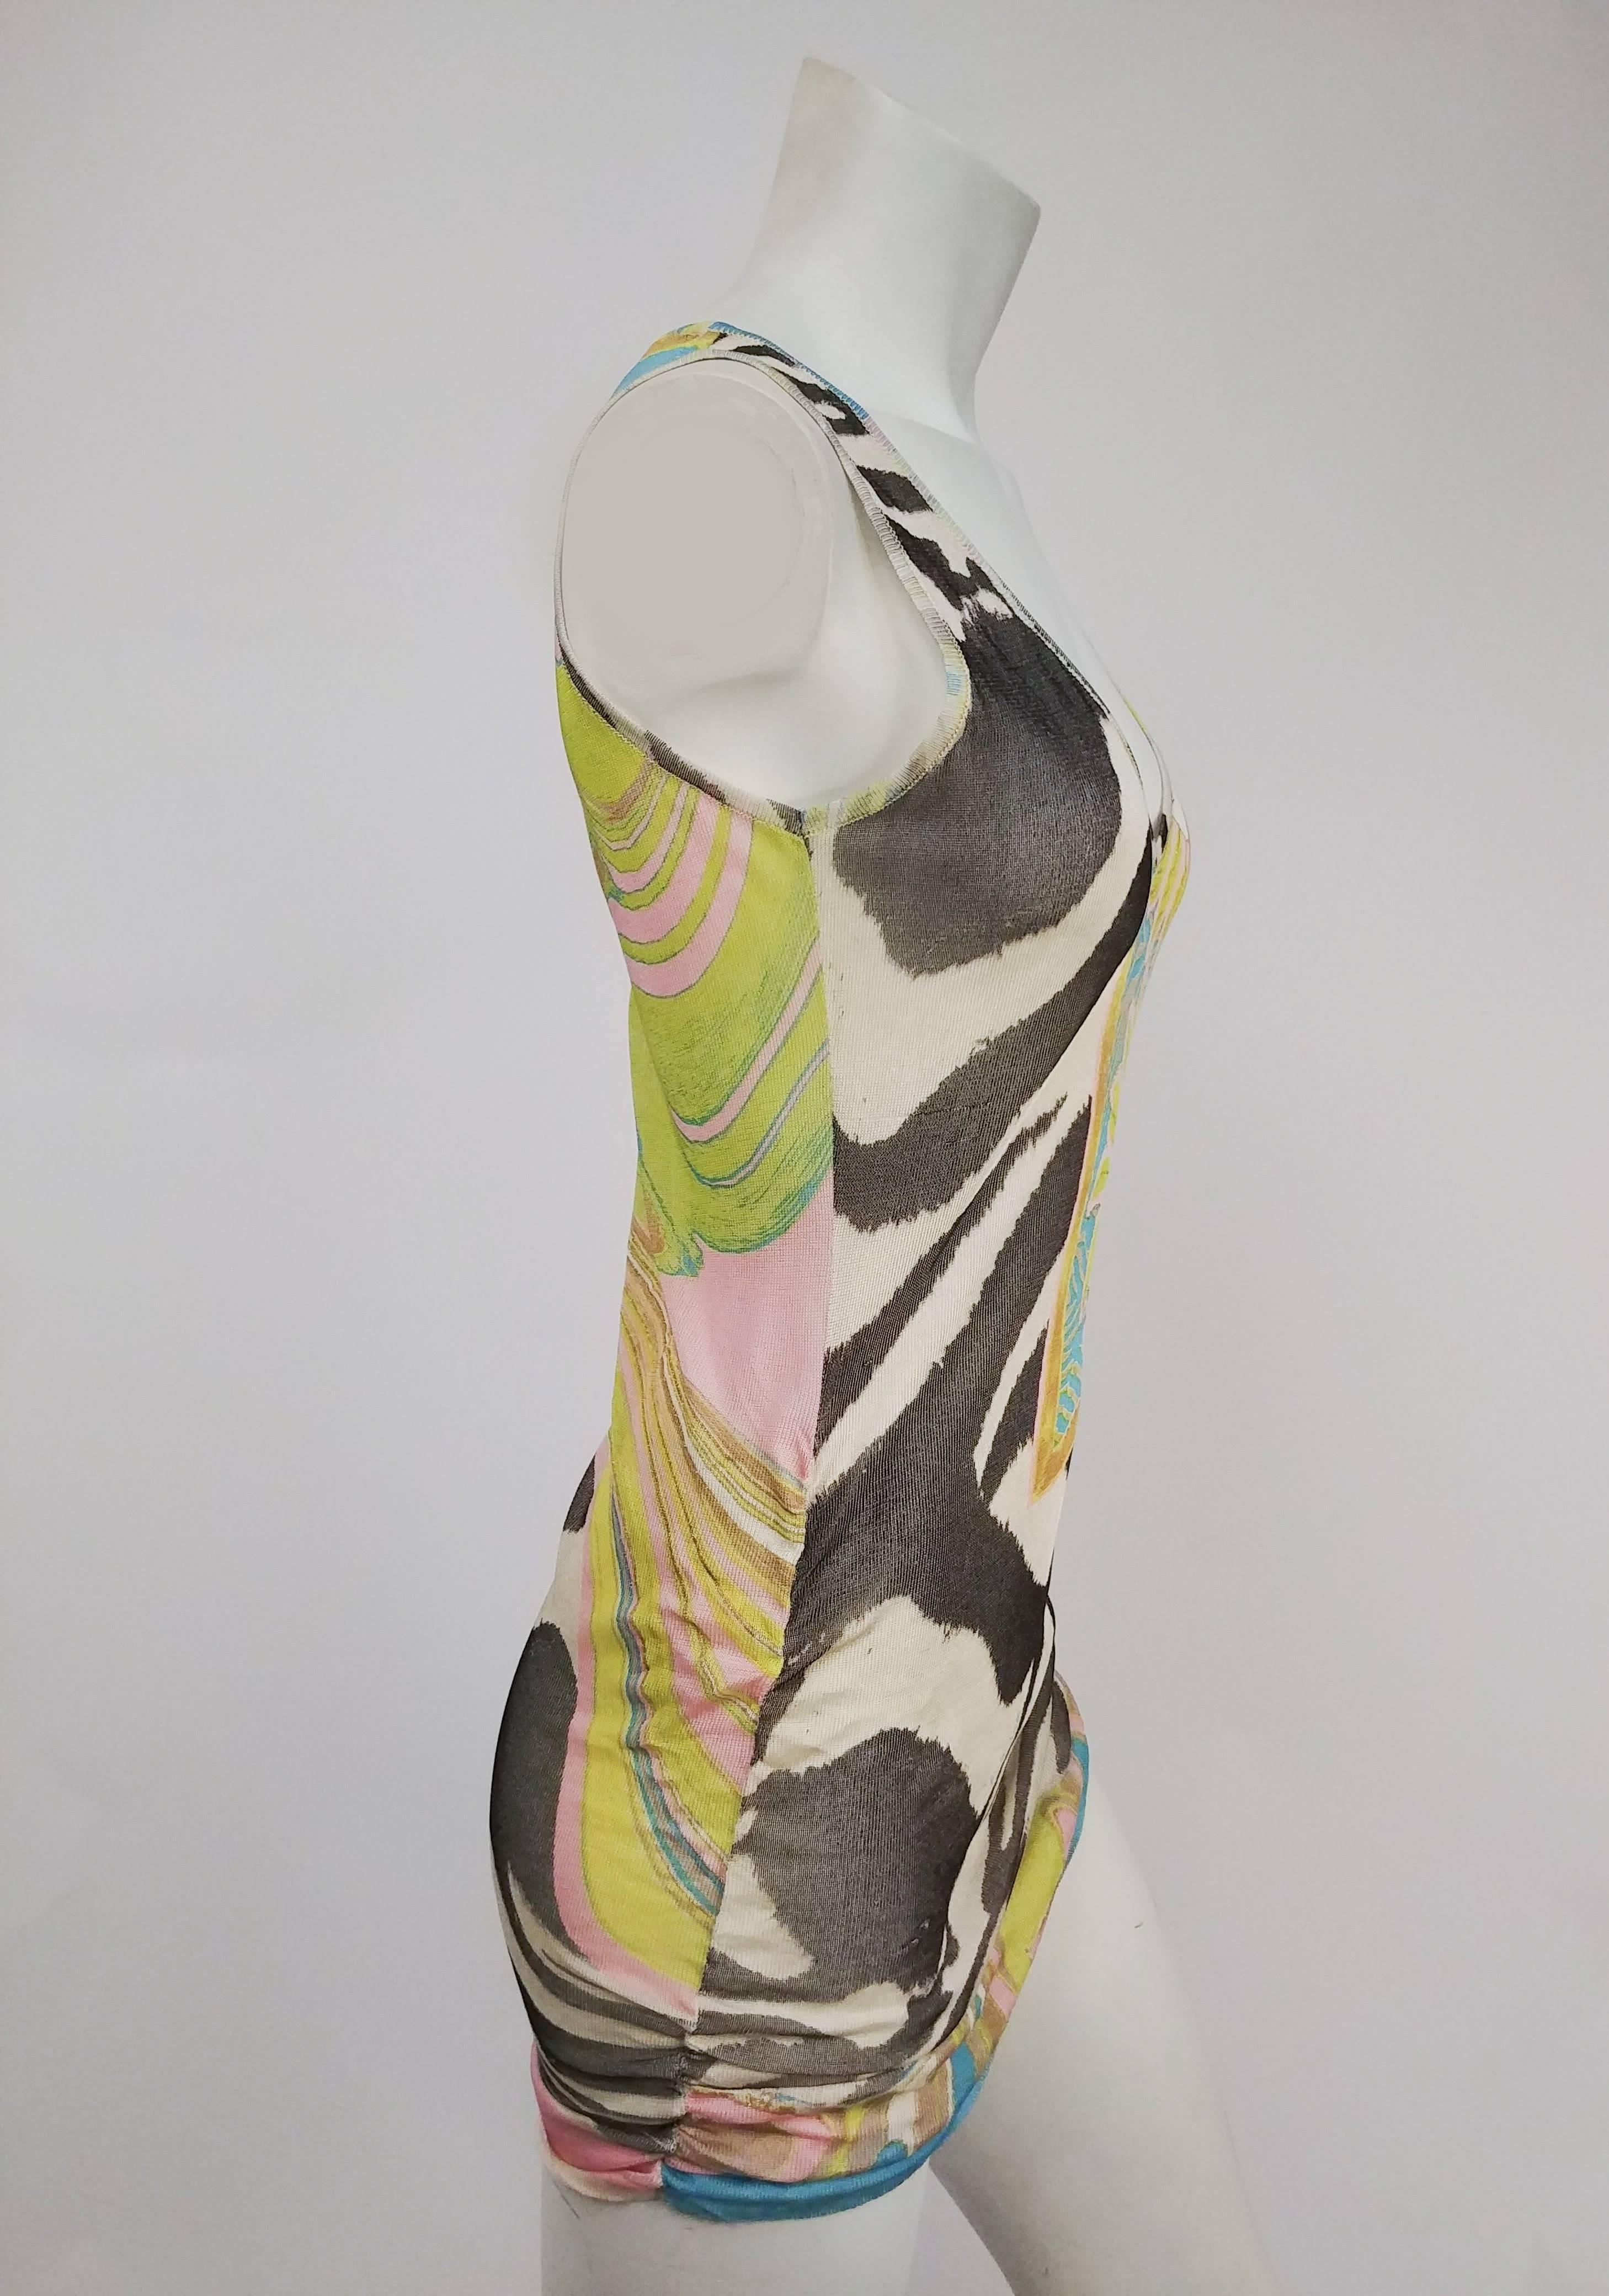 Roberto Cavalli Printed Knit Tank Top. Sheer knit tank, zebra and abstract print. Rushed at bottom sides. Headstock with tags, some snags in fabric from storage. 